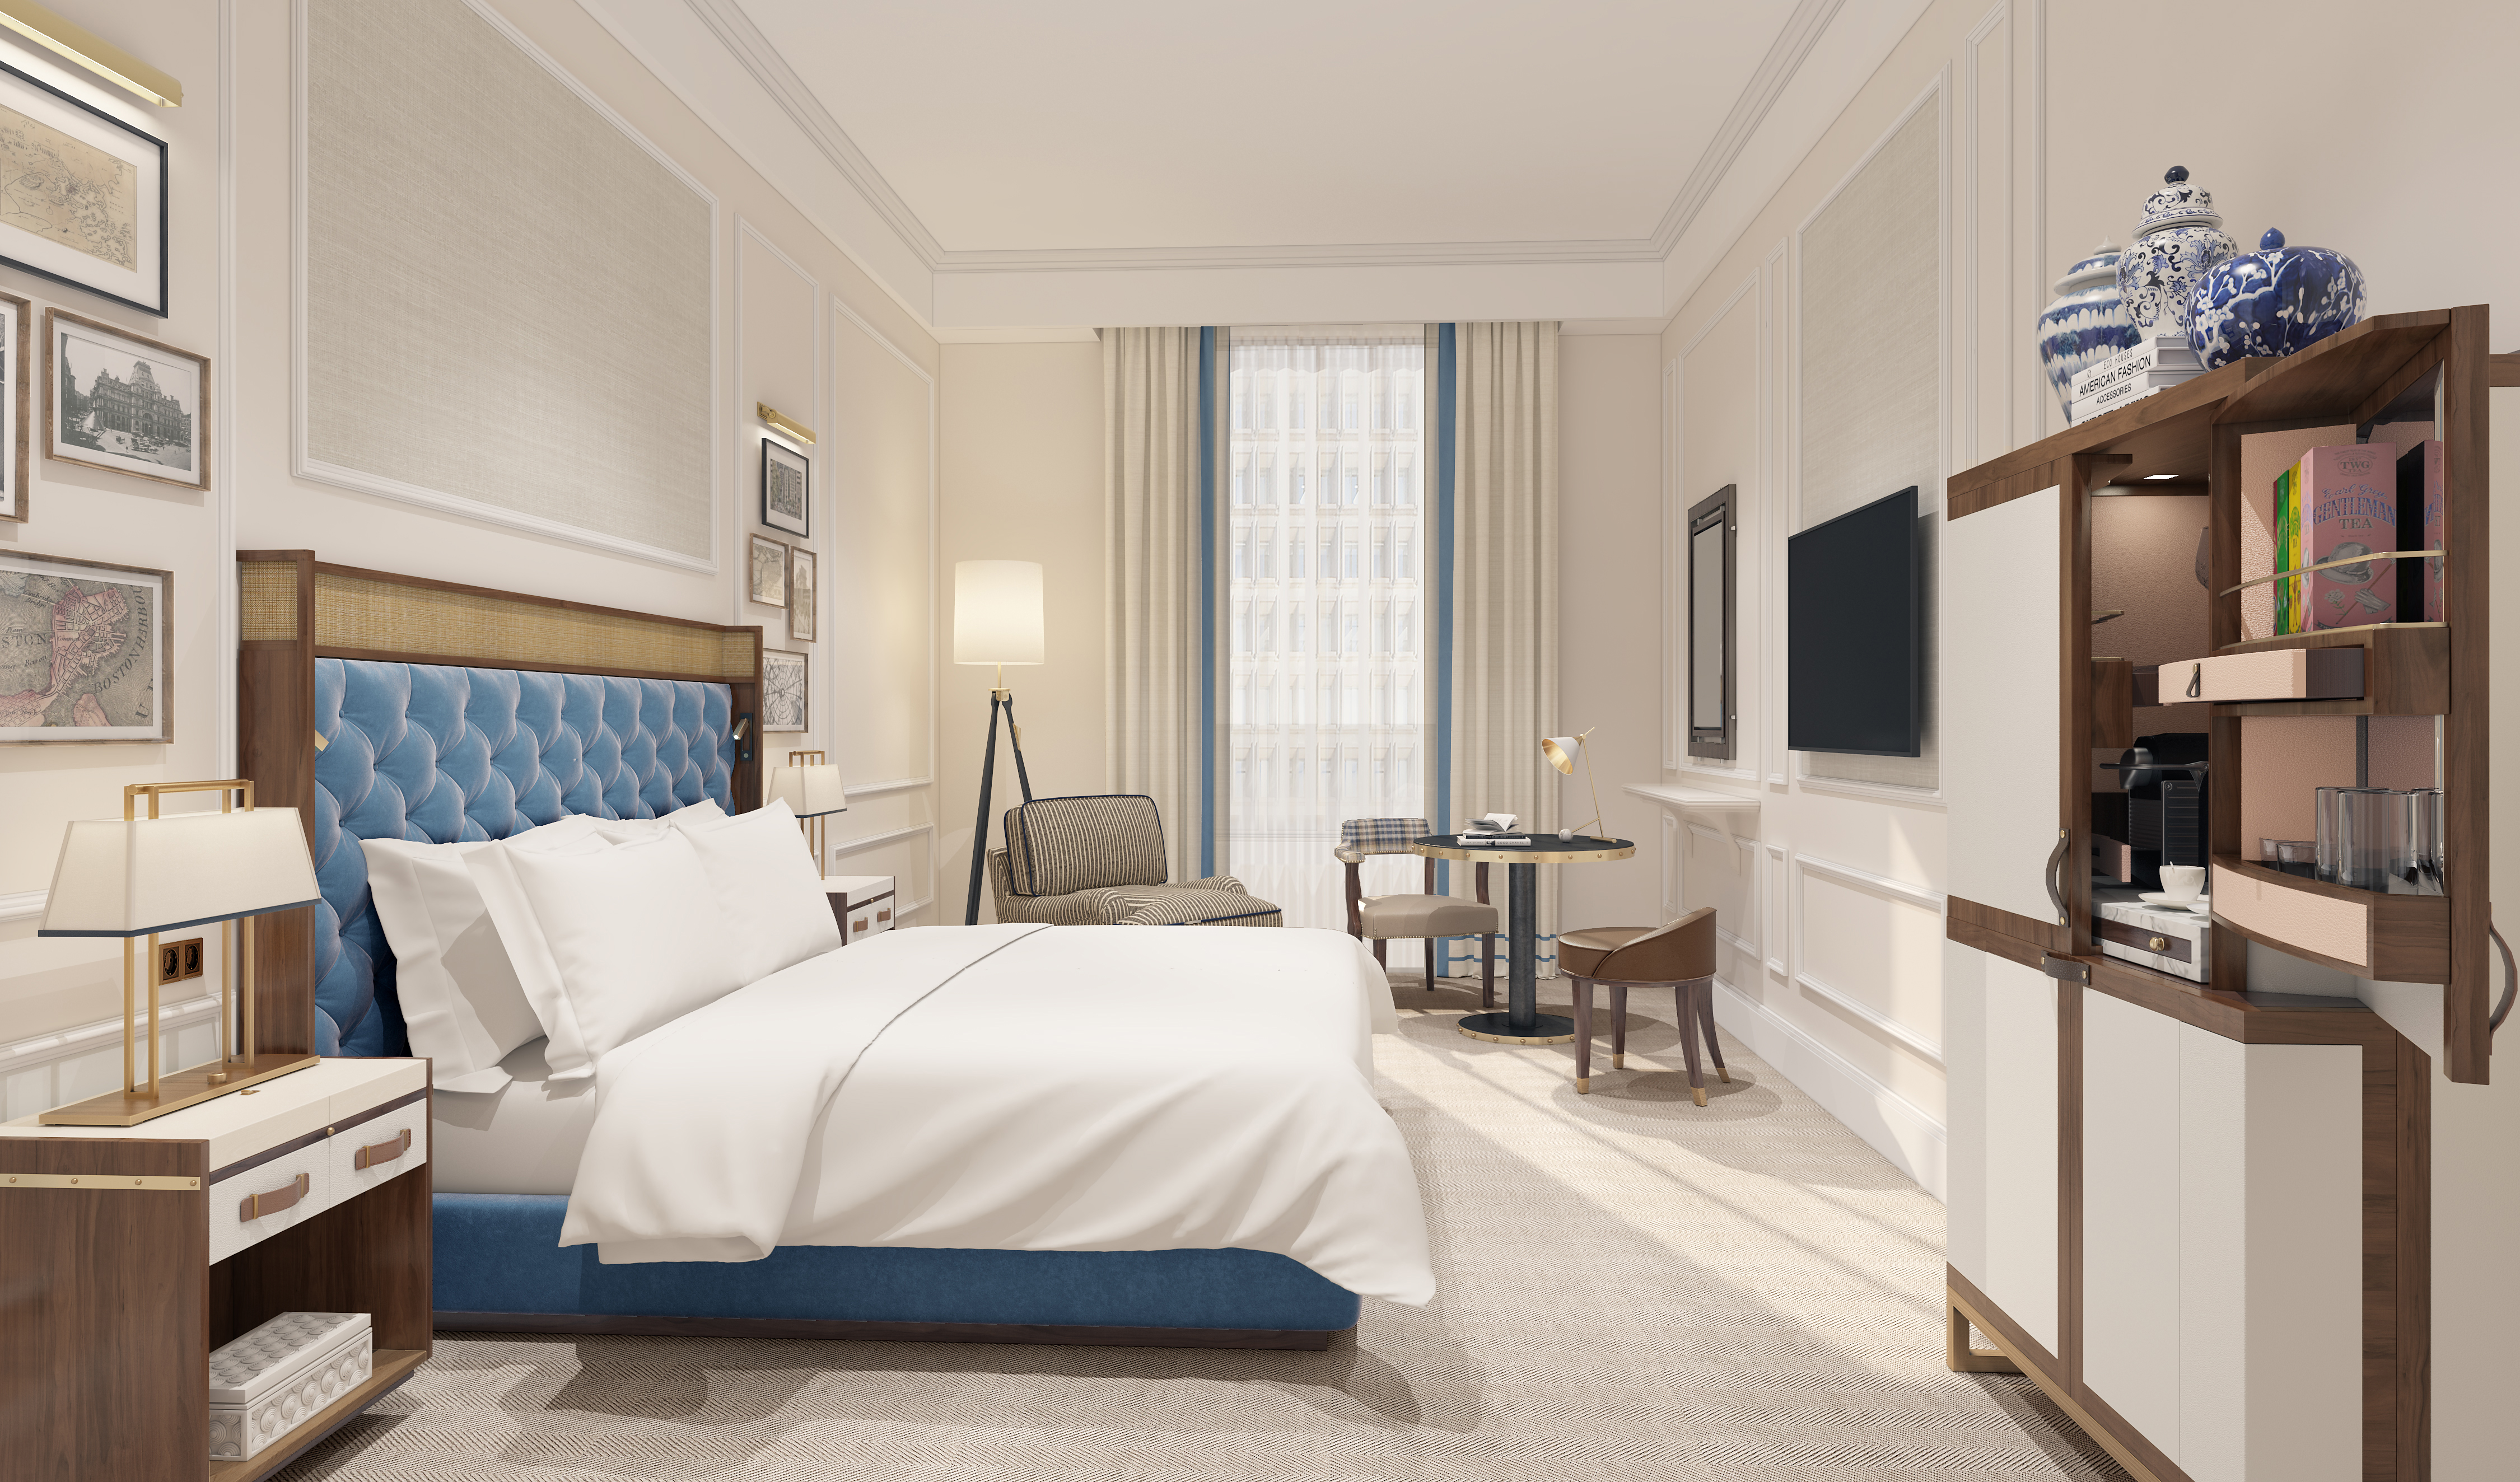 A room at the newly remodeled Langham Boston.